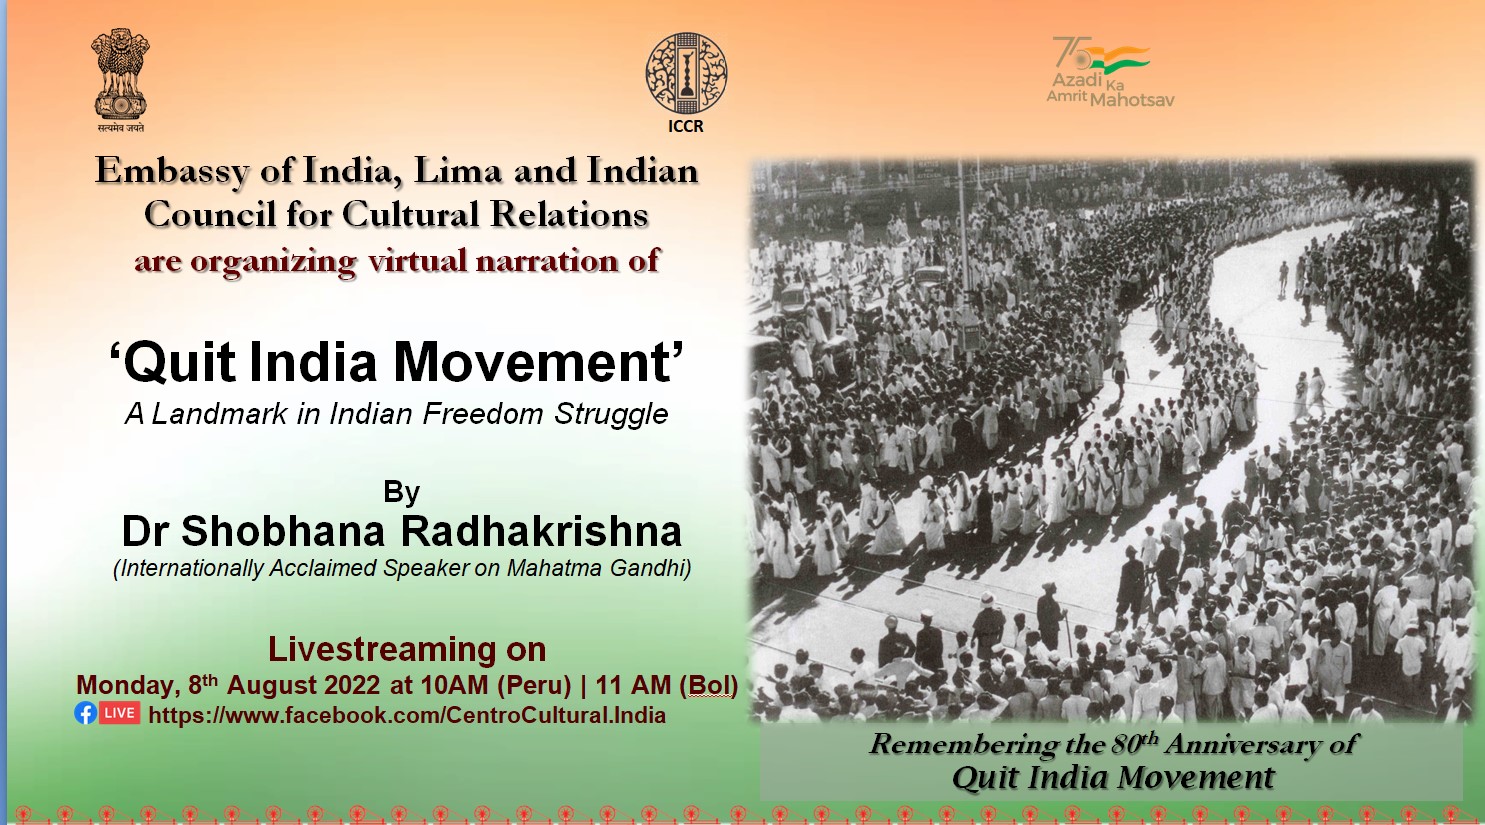 India Week - Virtual Narration of Quit India Movement